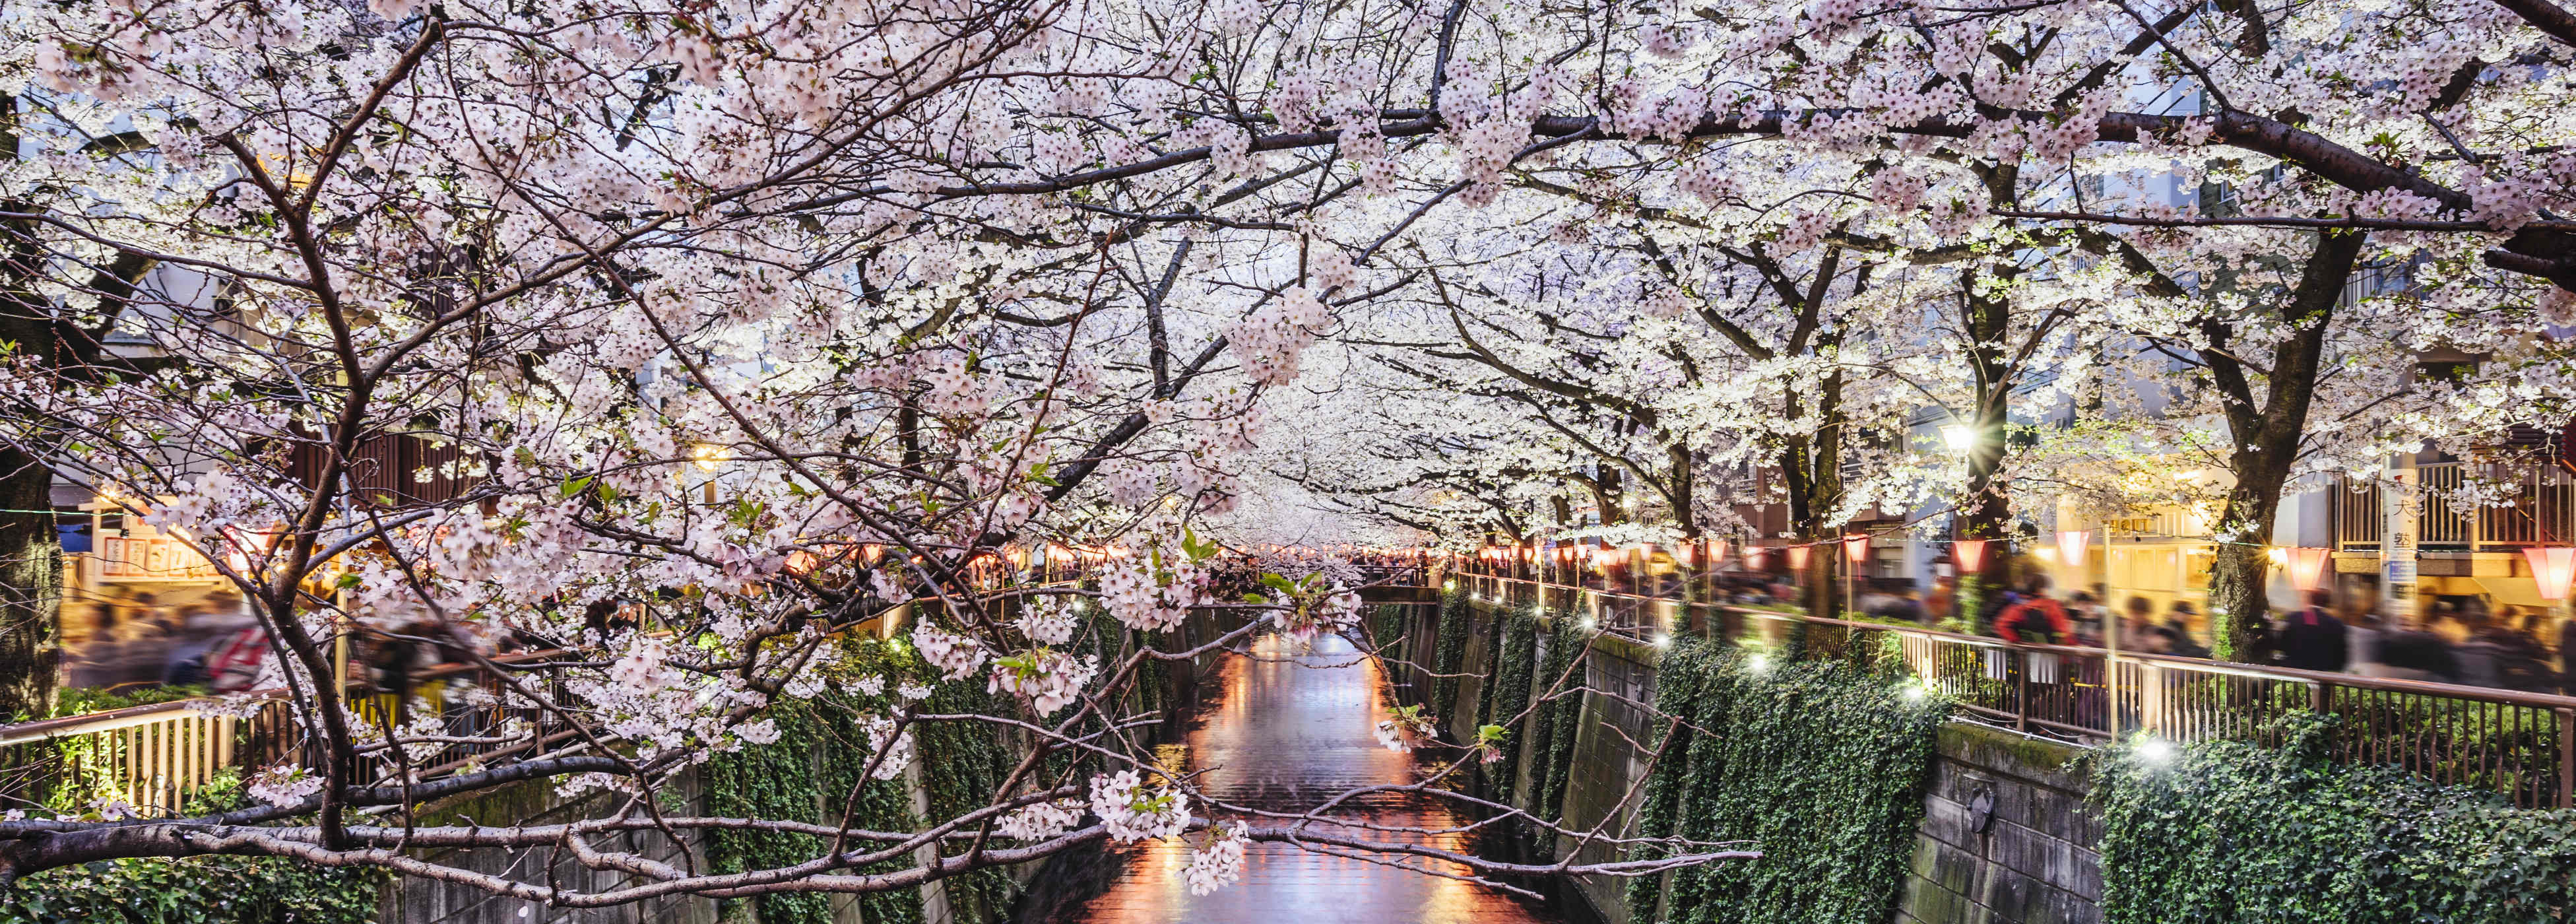 Blossom on trees in Japan